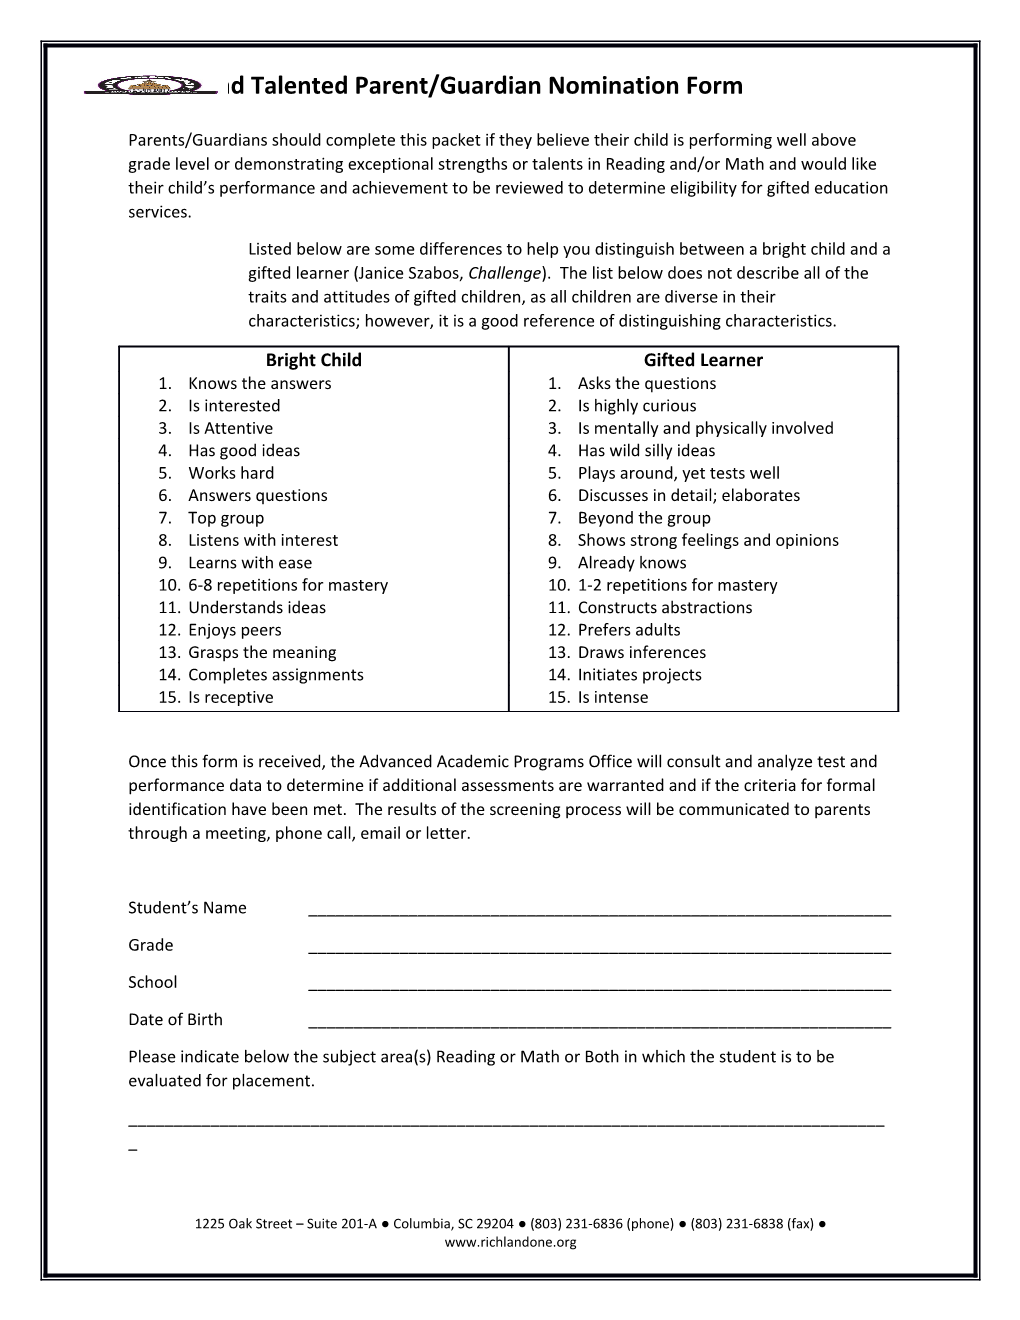 Gifted and Talented Parent/Guardian Nomination Form